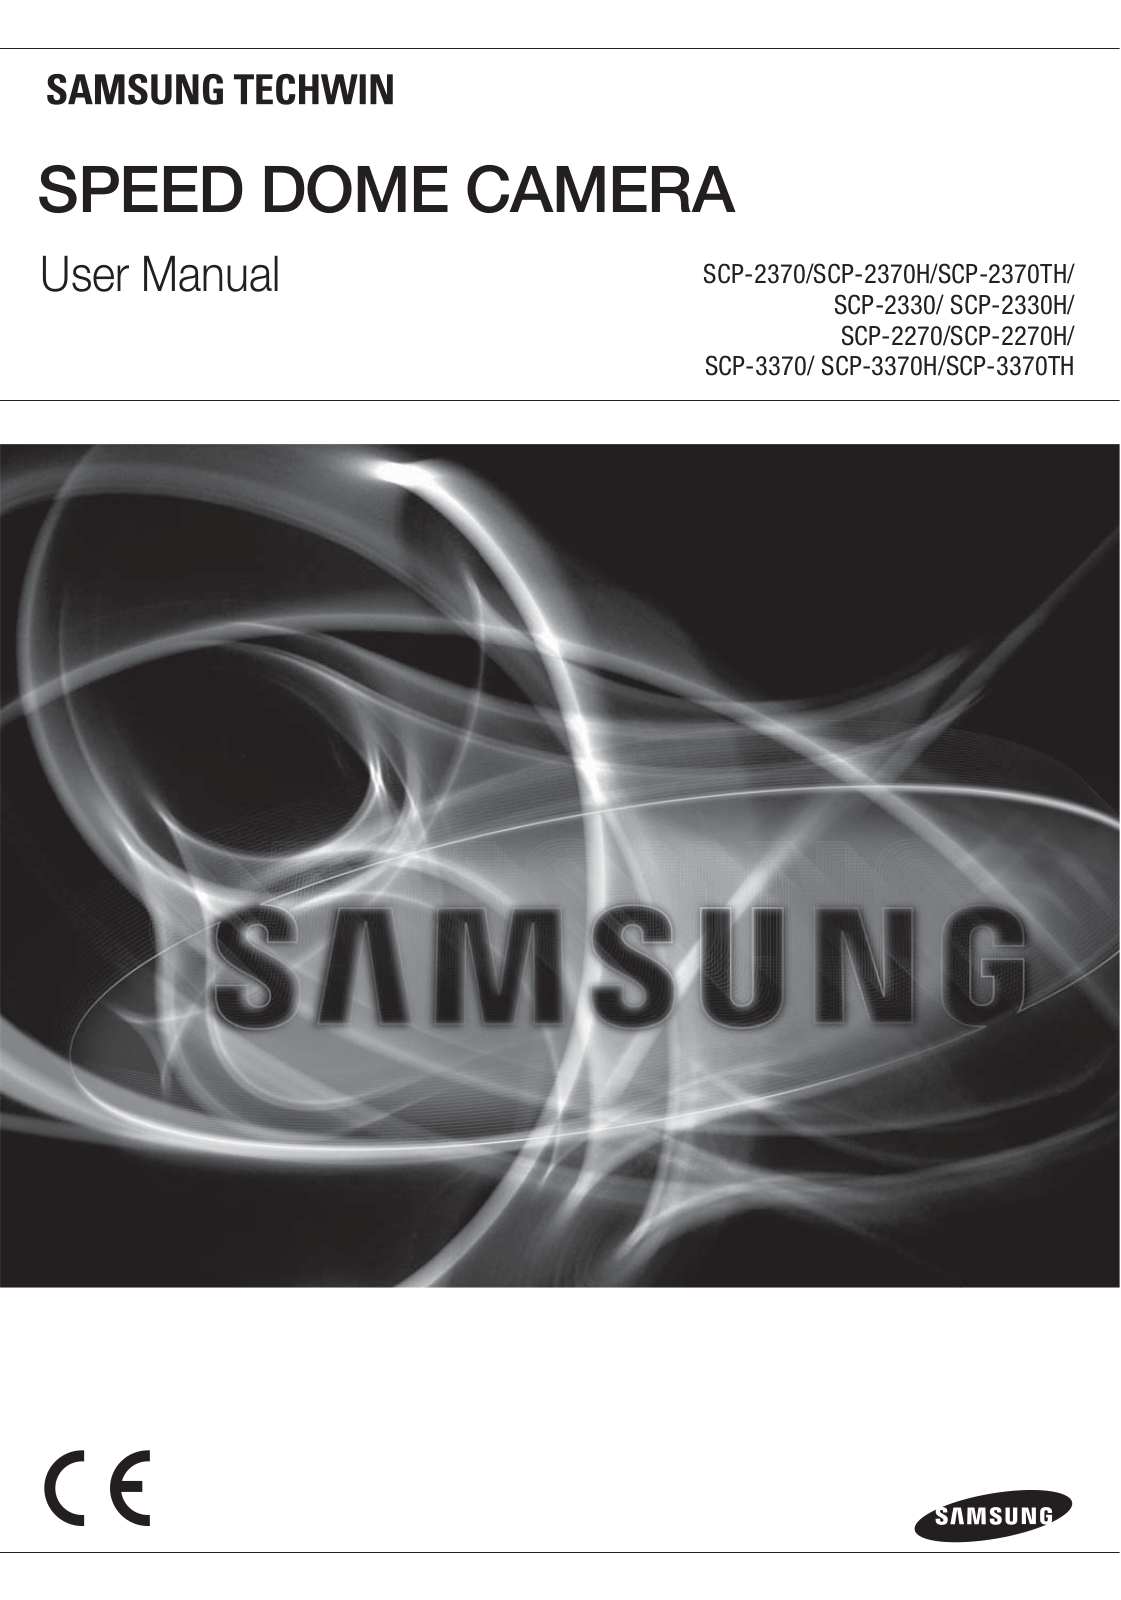 Samsung SCP-2270N, SCP-2370, SCP-2370TH, SCP-2270, SCP-2270H User Manual